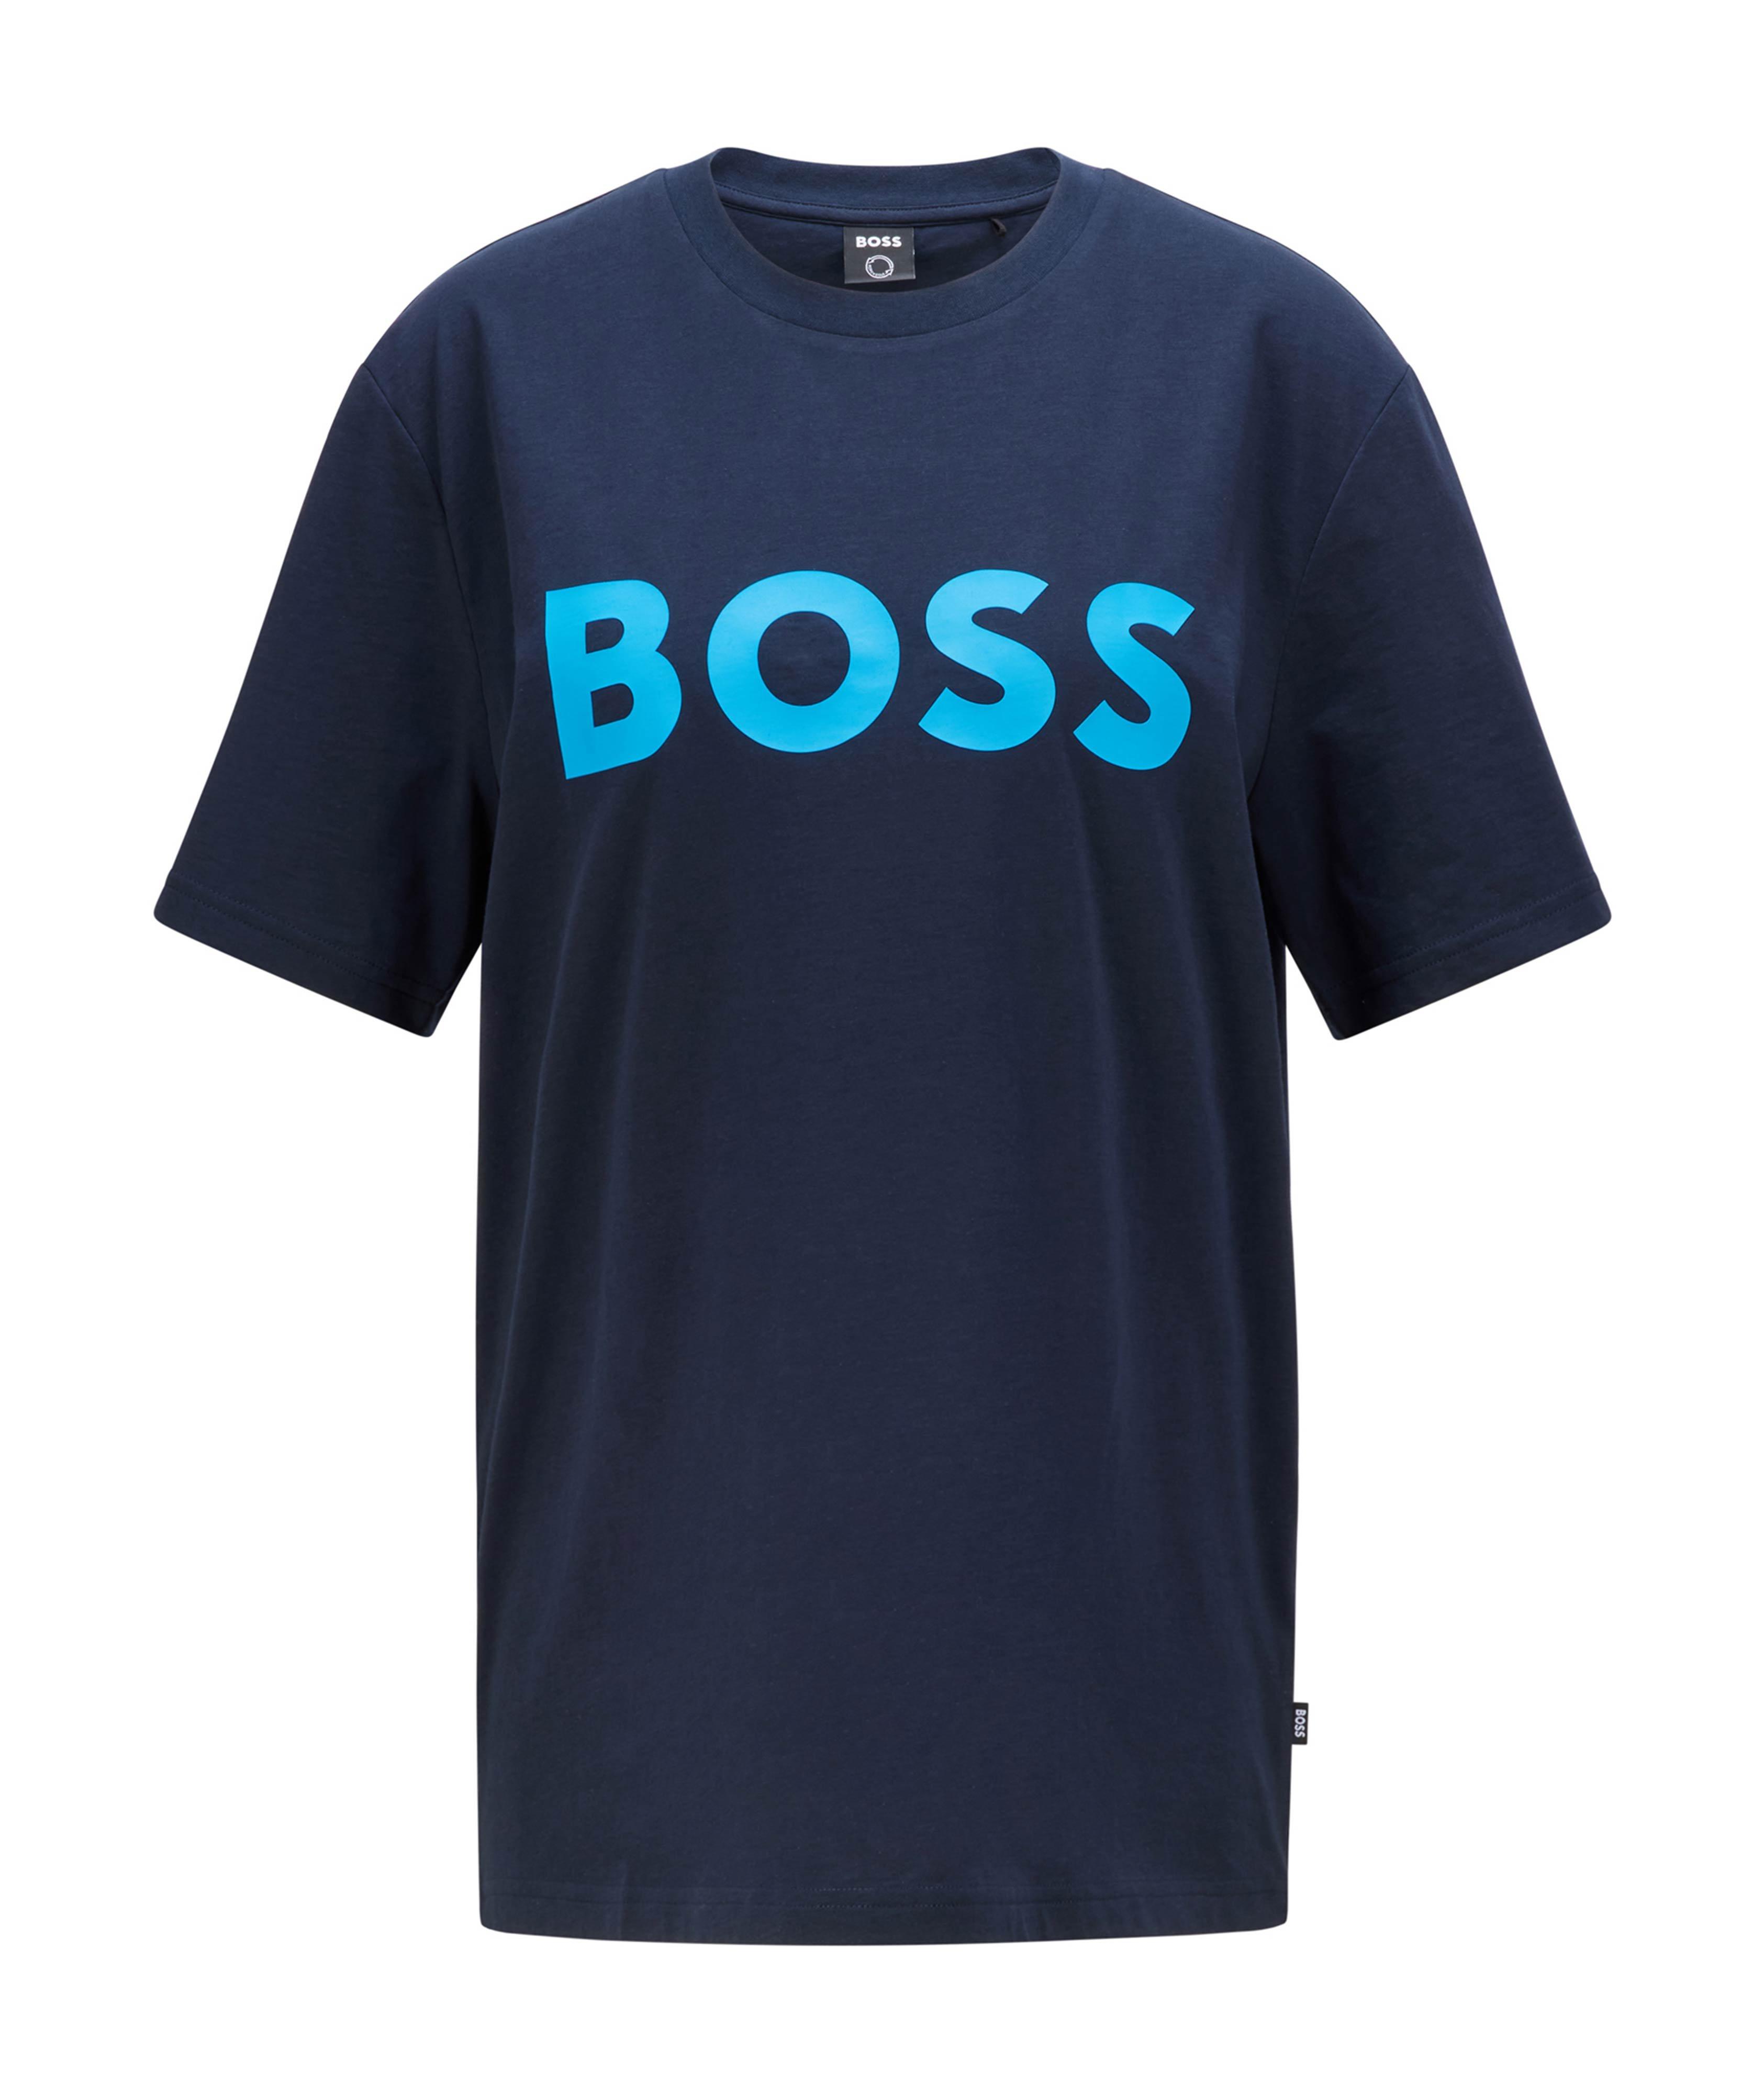 Cotton-Blend T-Shirt with Graphic Logo  image 0